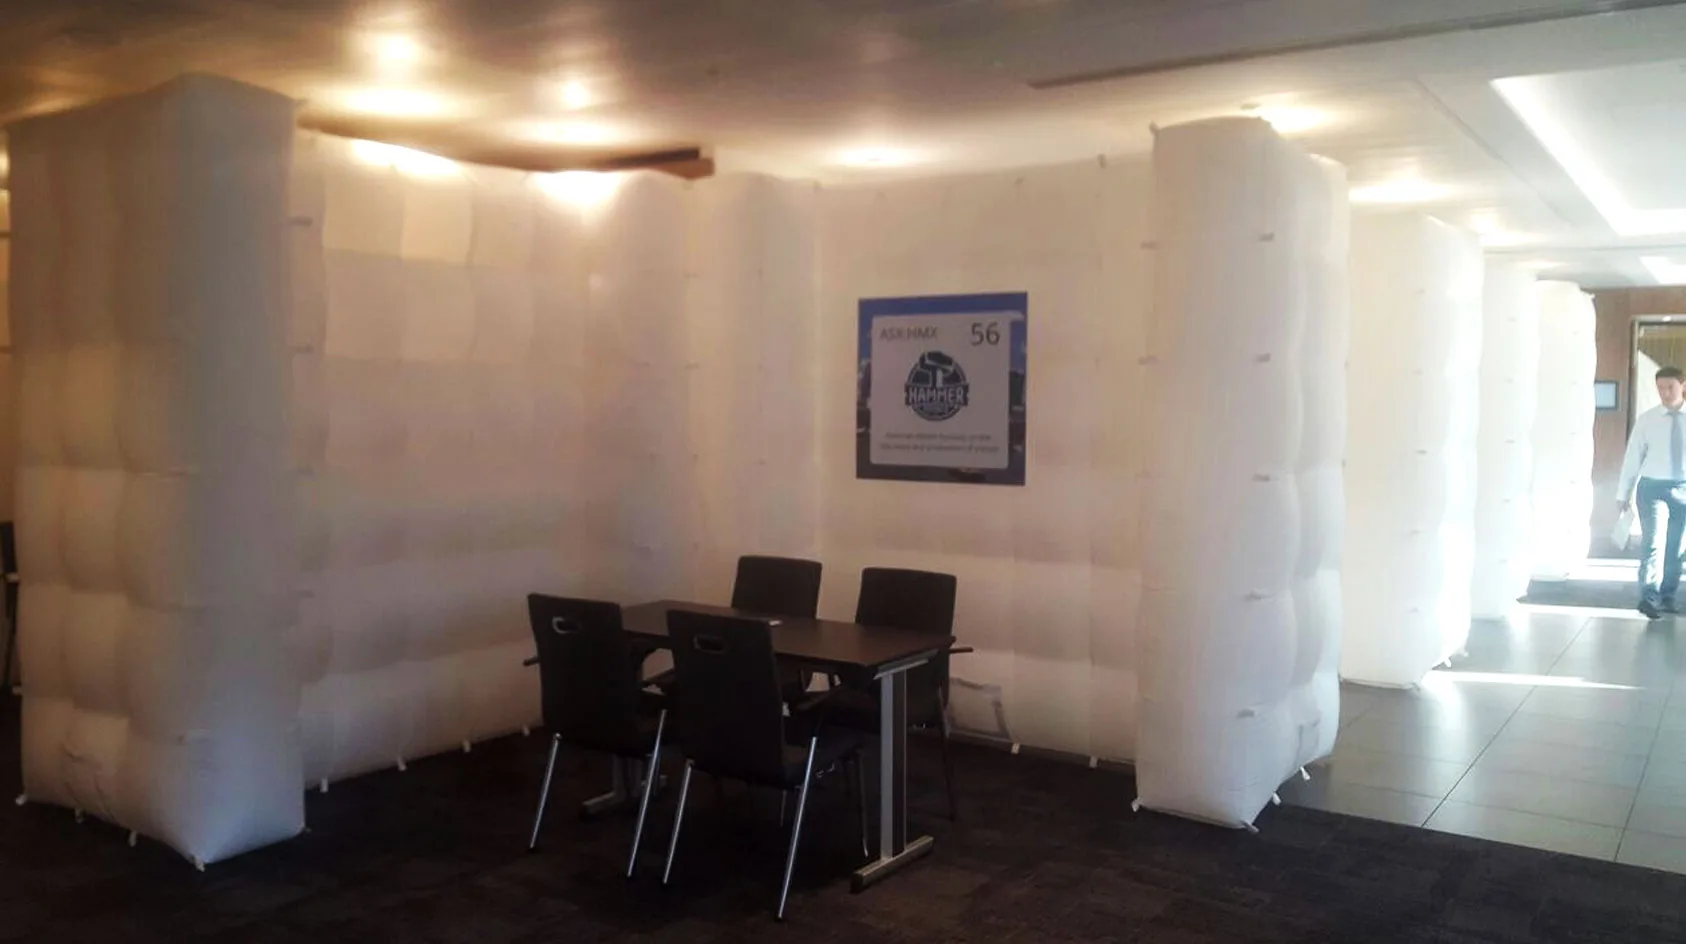 Pic showing four Created By Air Crosswalls used as inflatable dividers in an office